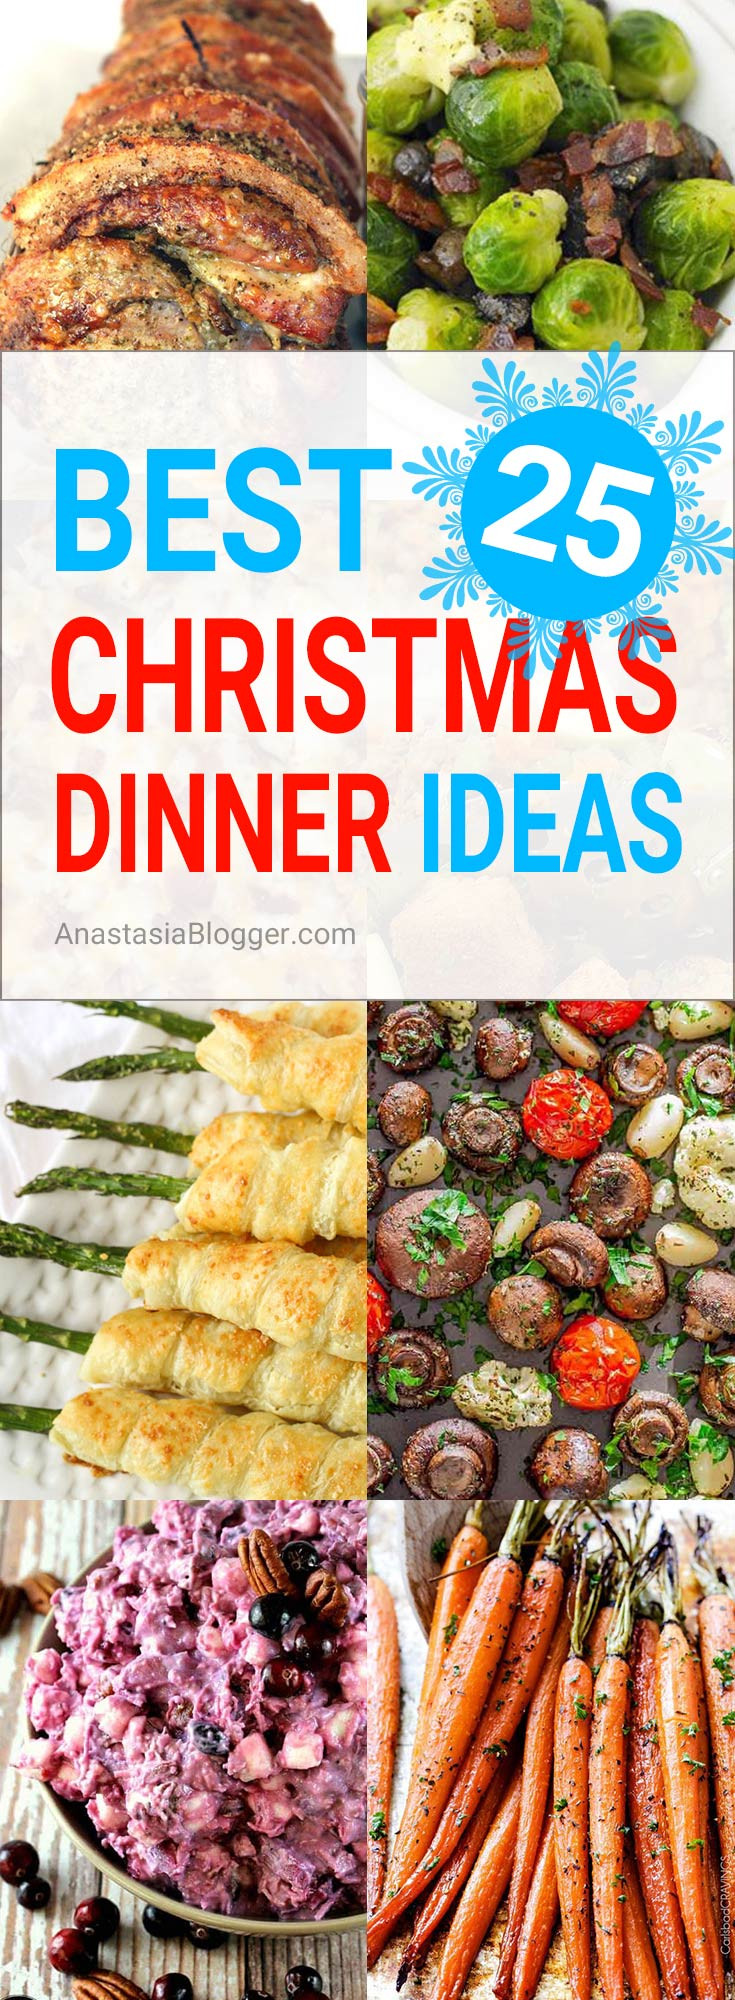 21 Ideas For Southern Christmas Dinner Menu Ideas Best Diet And Healthy Recipes Ever Recipes Collection